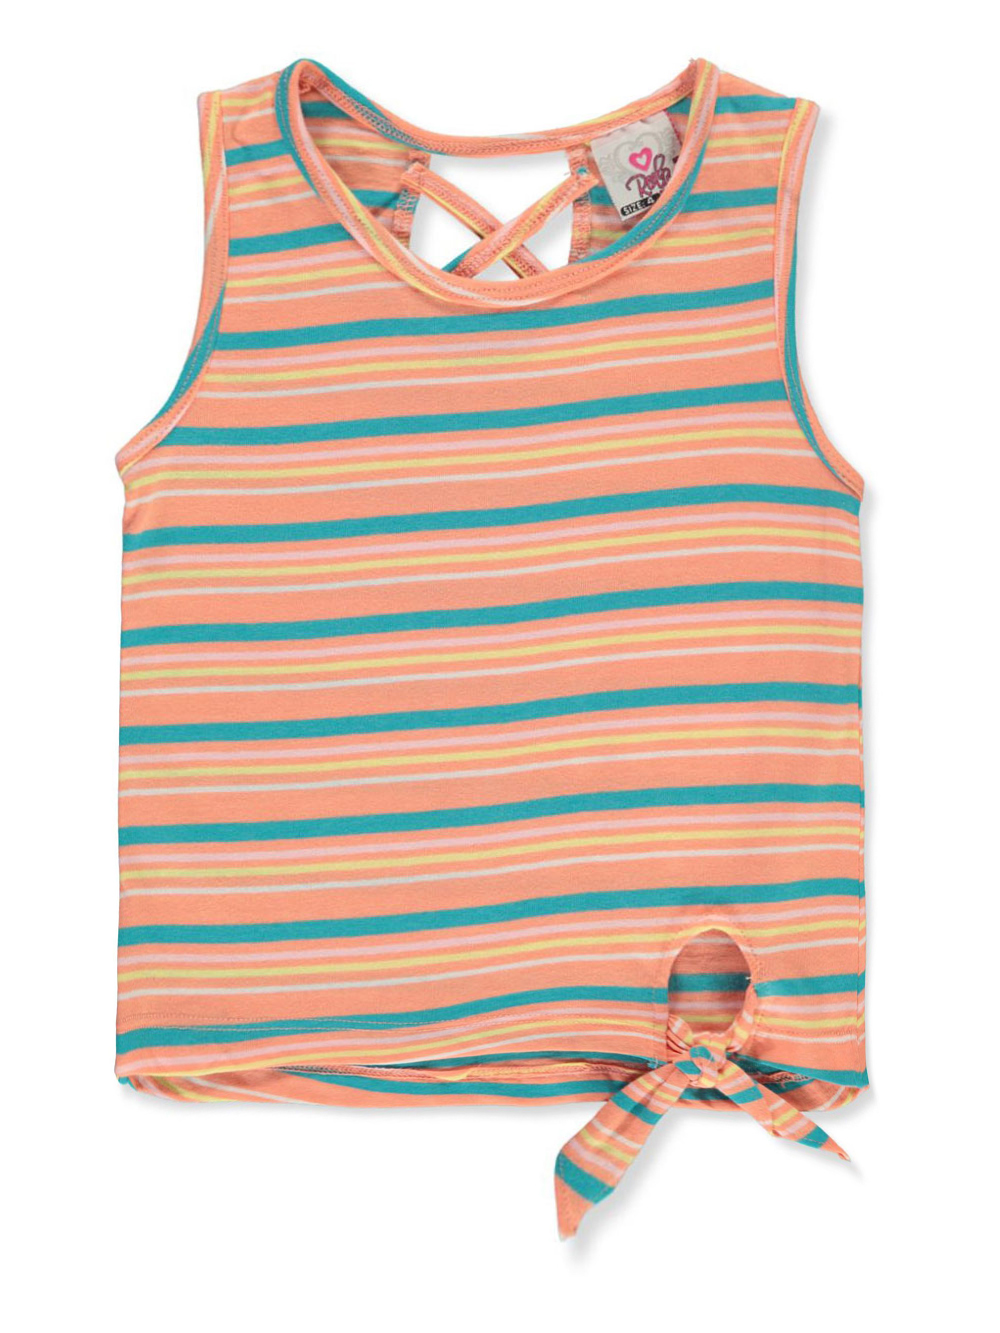 Size 6 Tank Tops for Girls